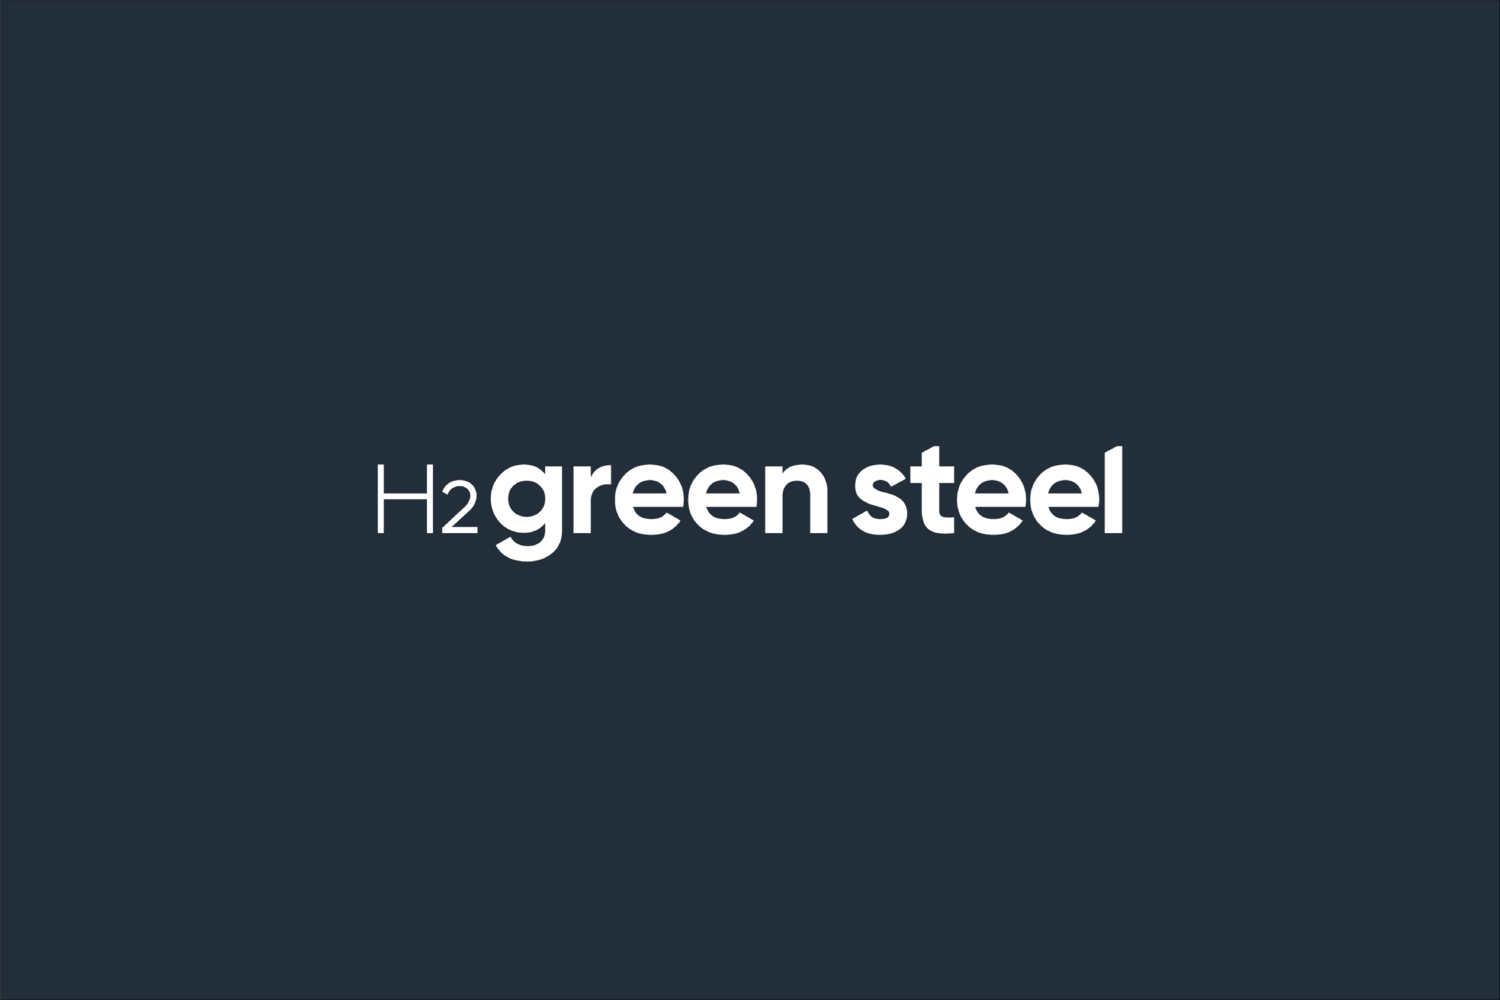 H2 Green Steel plans to build a new green steel plant